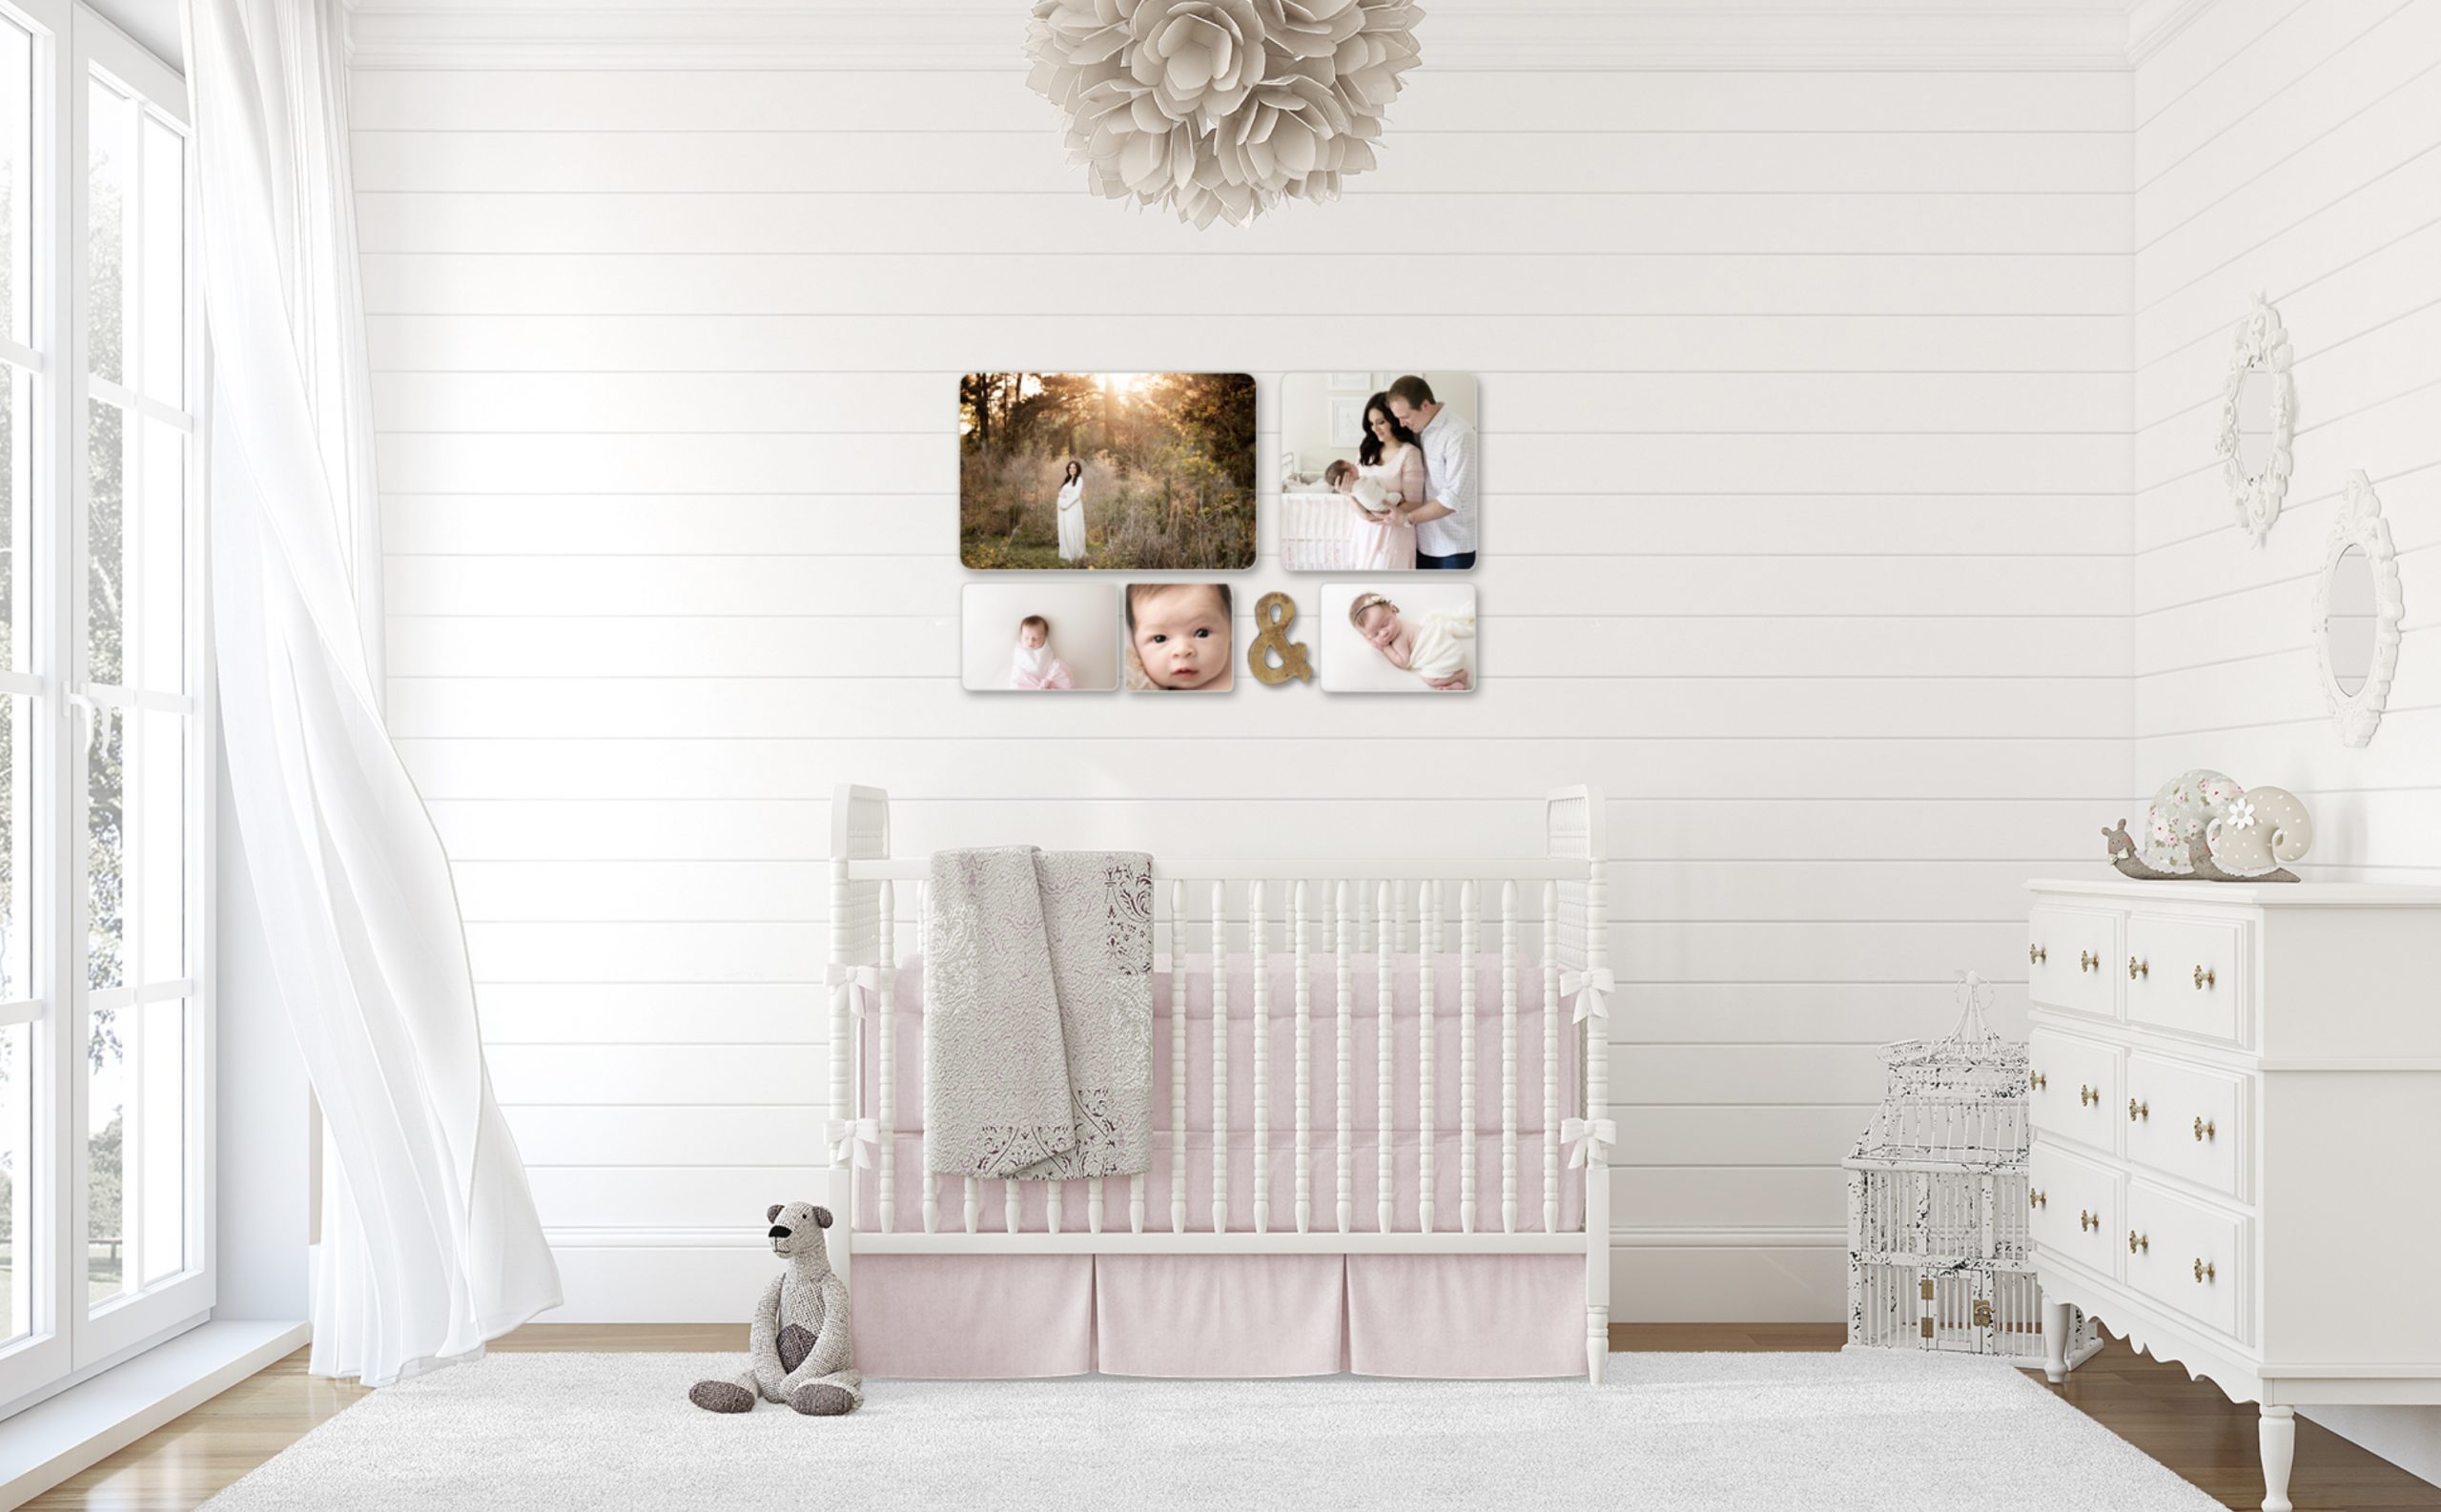 artwork hung over baby's crib with gray blanket and teddy bear